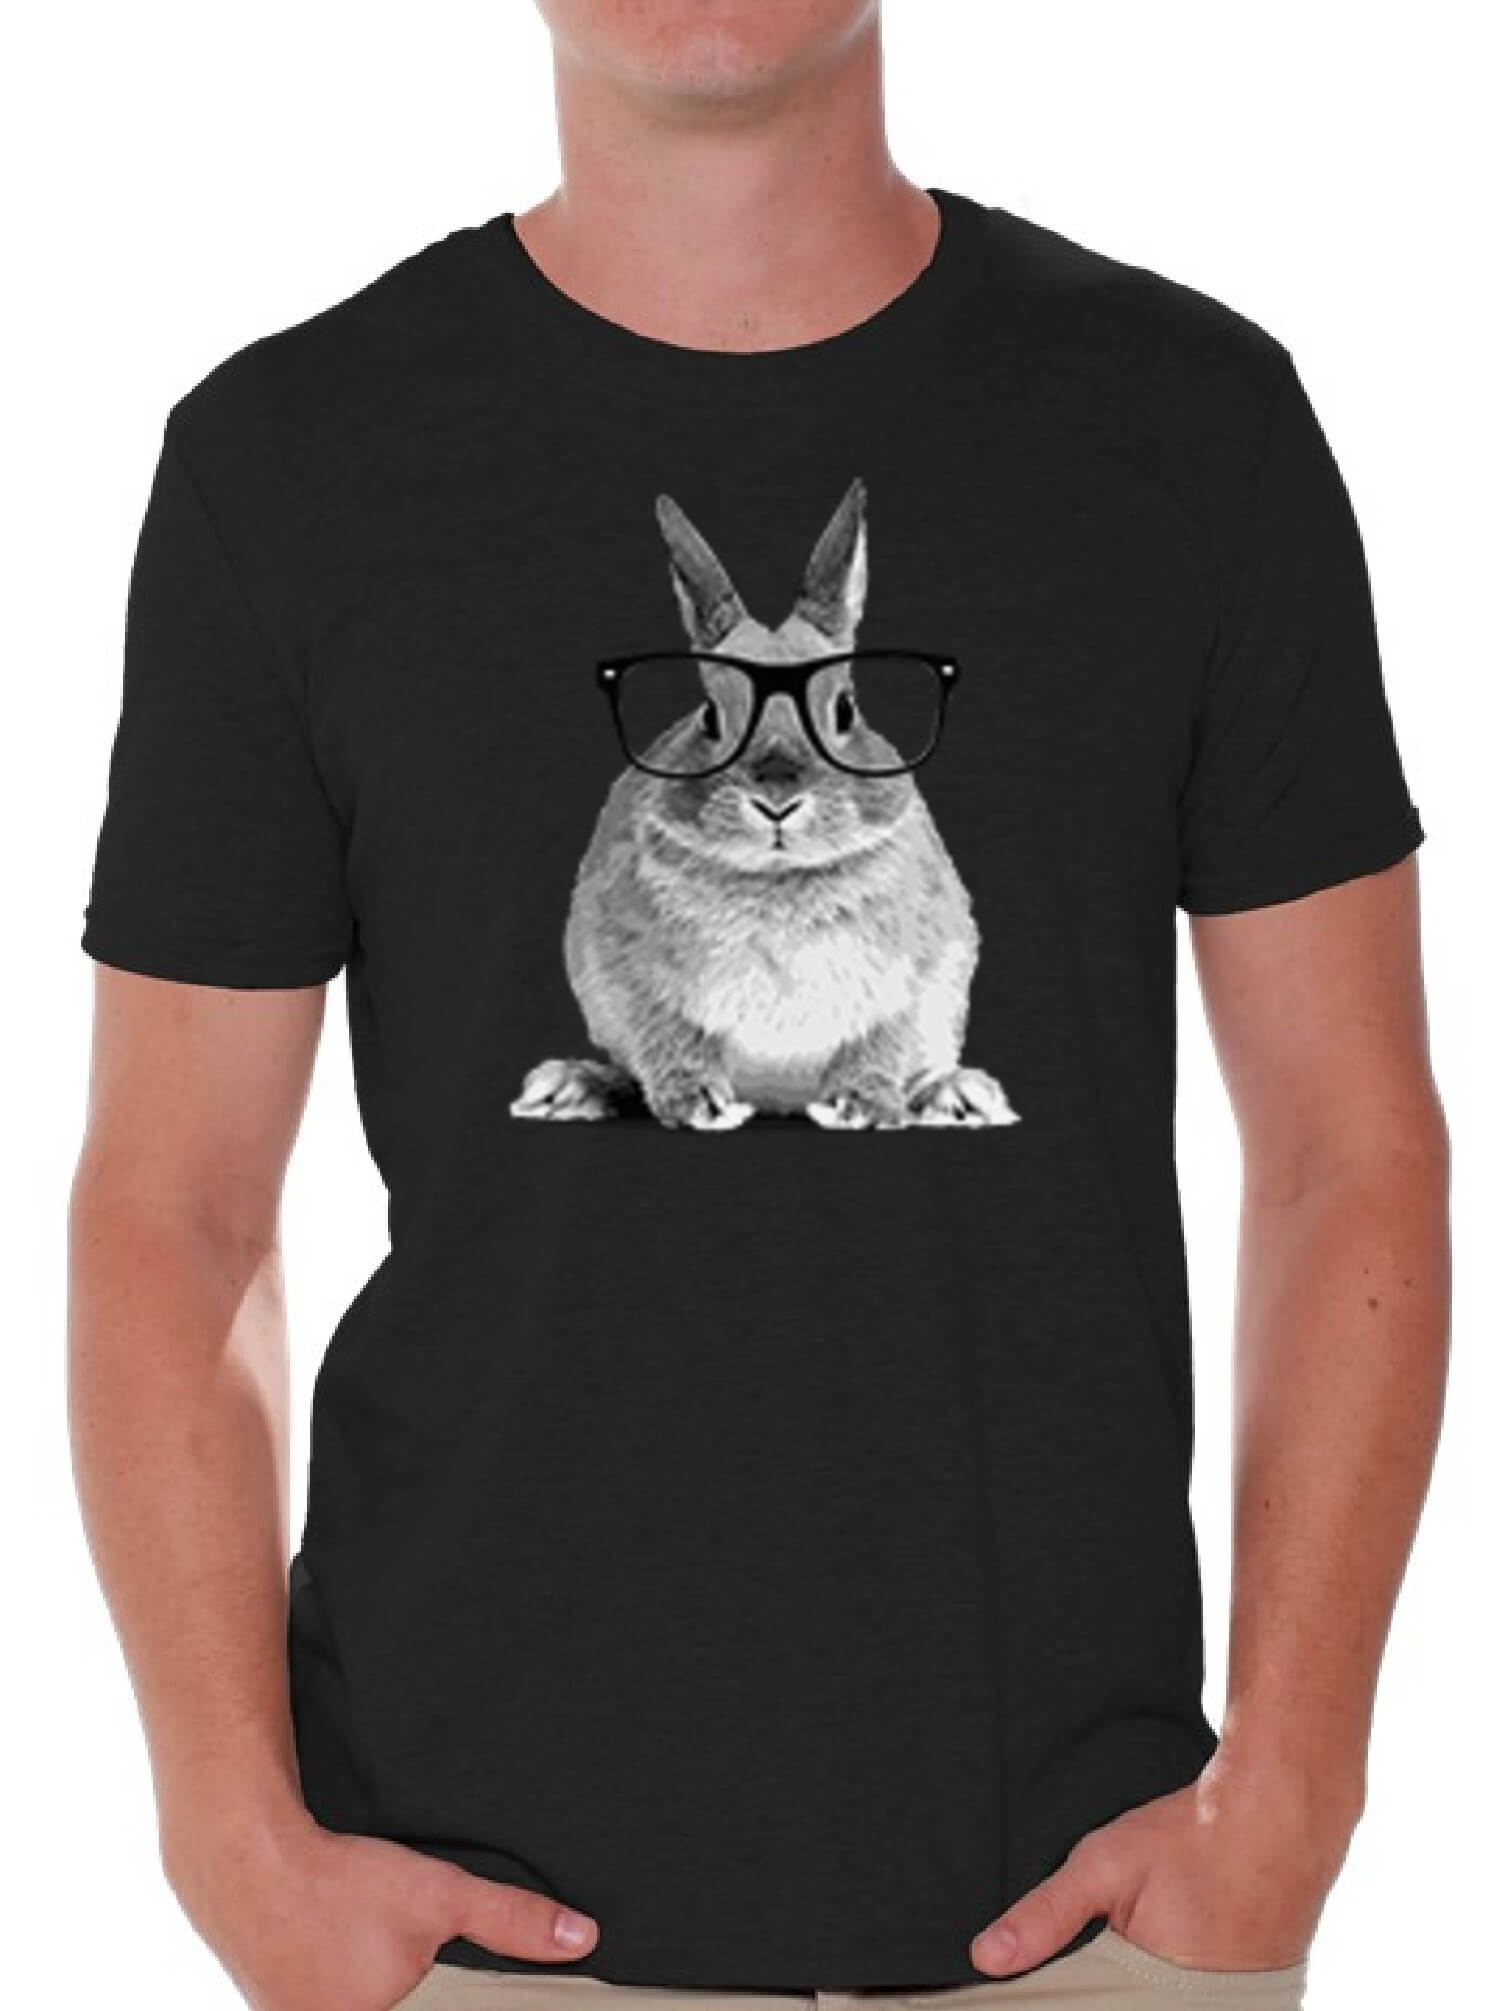 Rabbit With Glasses T shirts Shirts Tops Men's Funny Cute Hipster | eBay